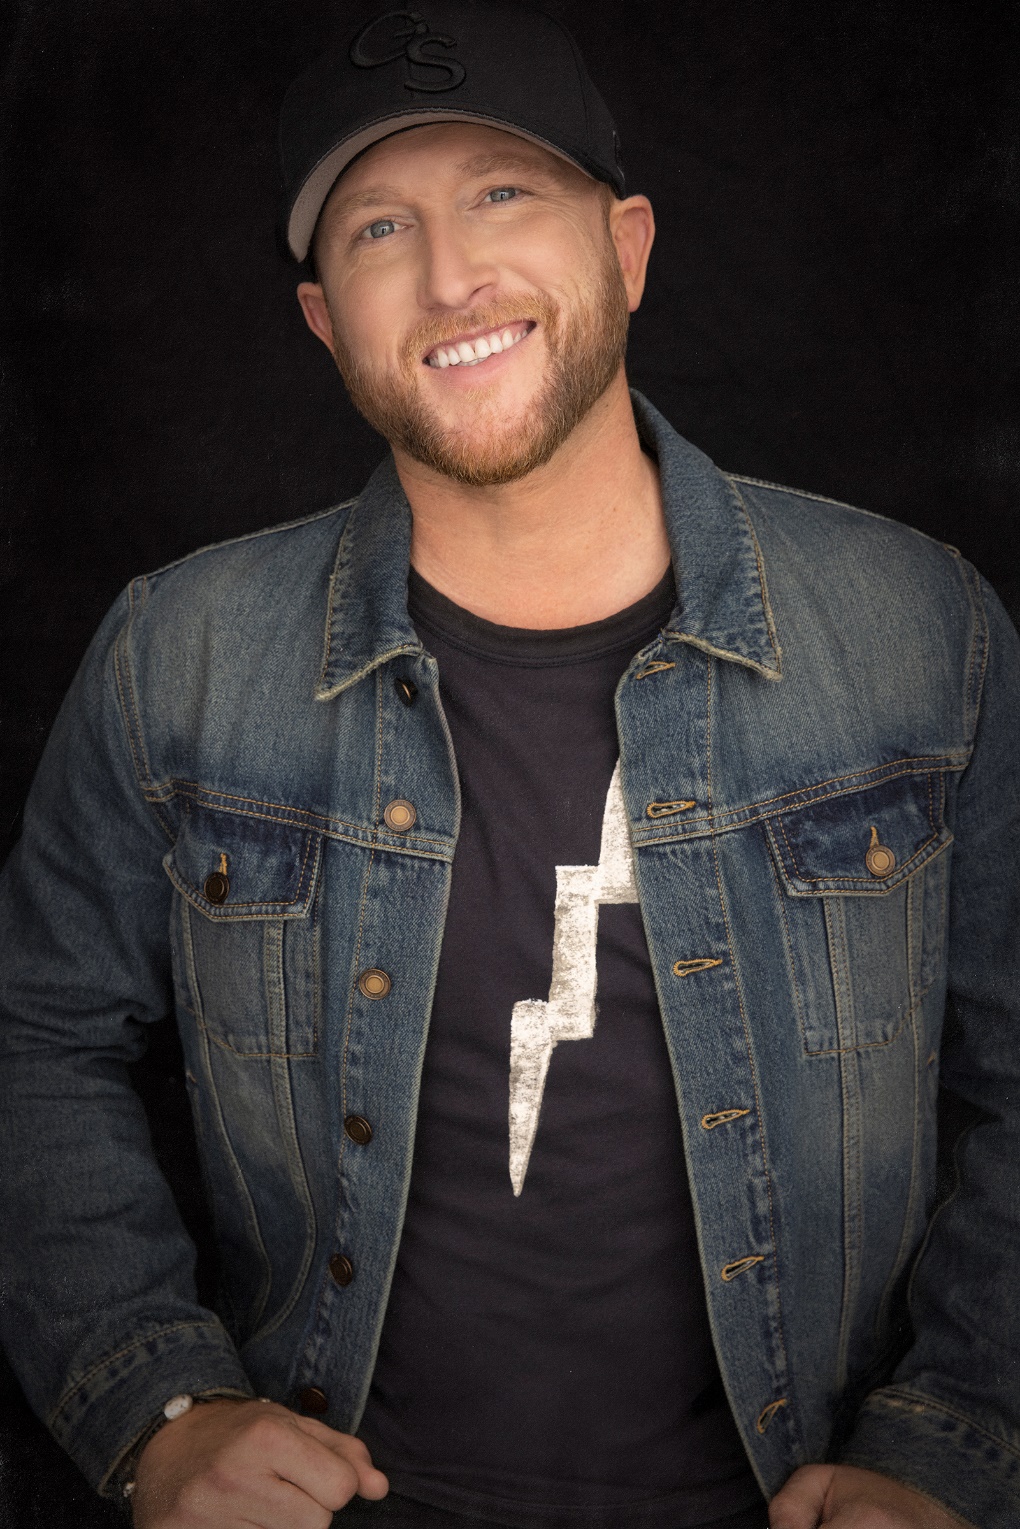 COLE SWINDELL CLOSES OUT THE BIGGEST YEAR OF HIS CAREER: